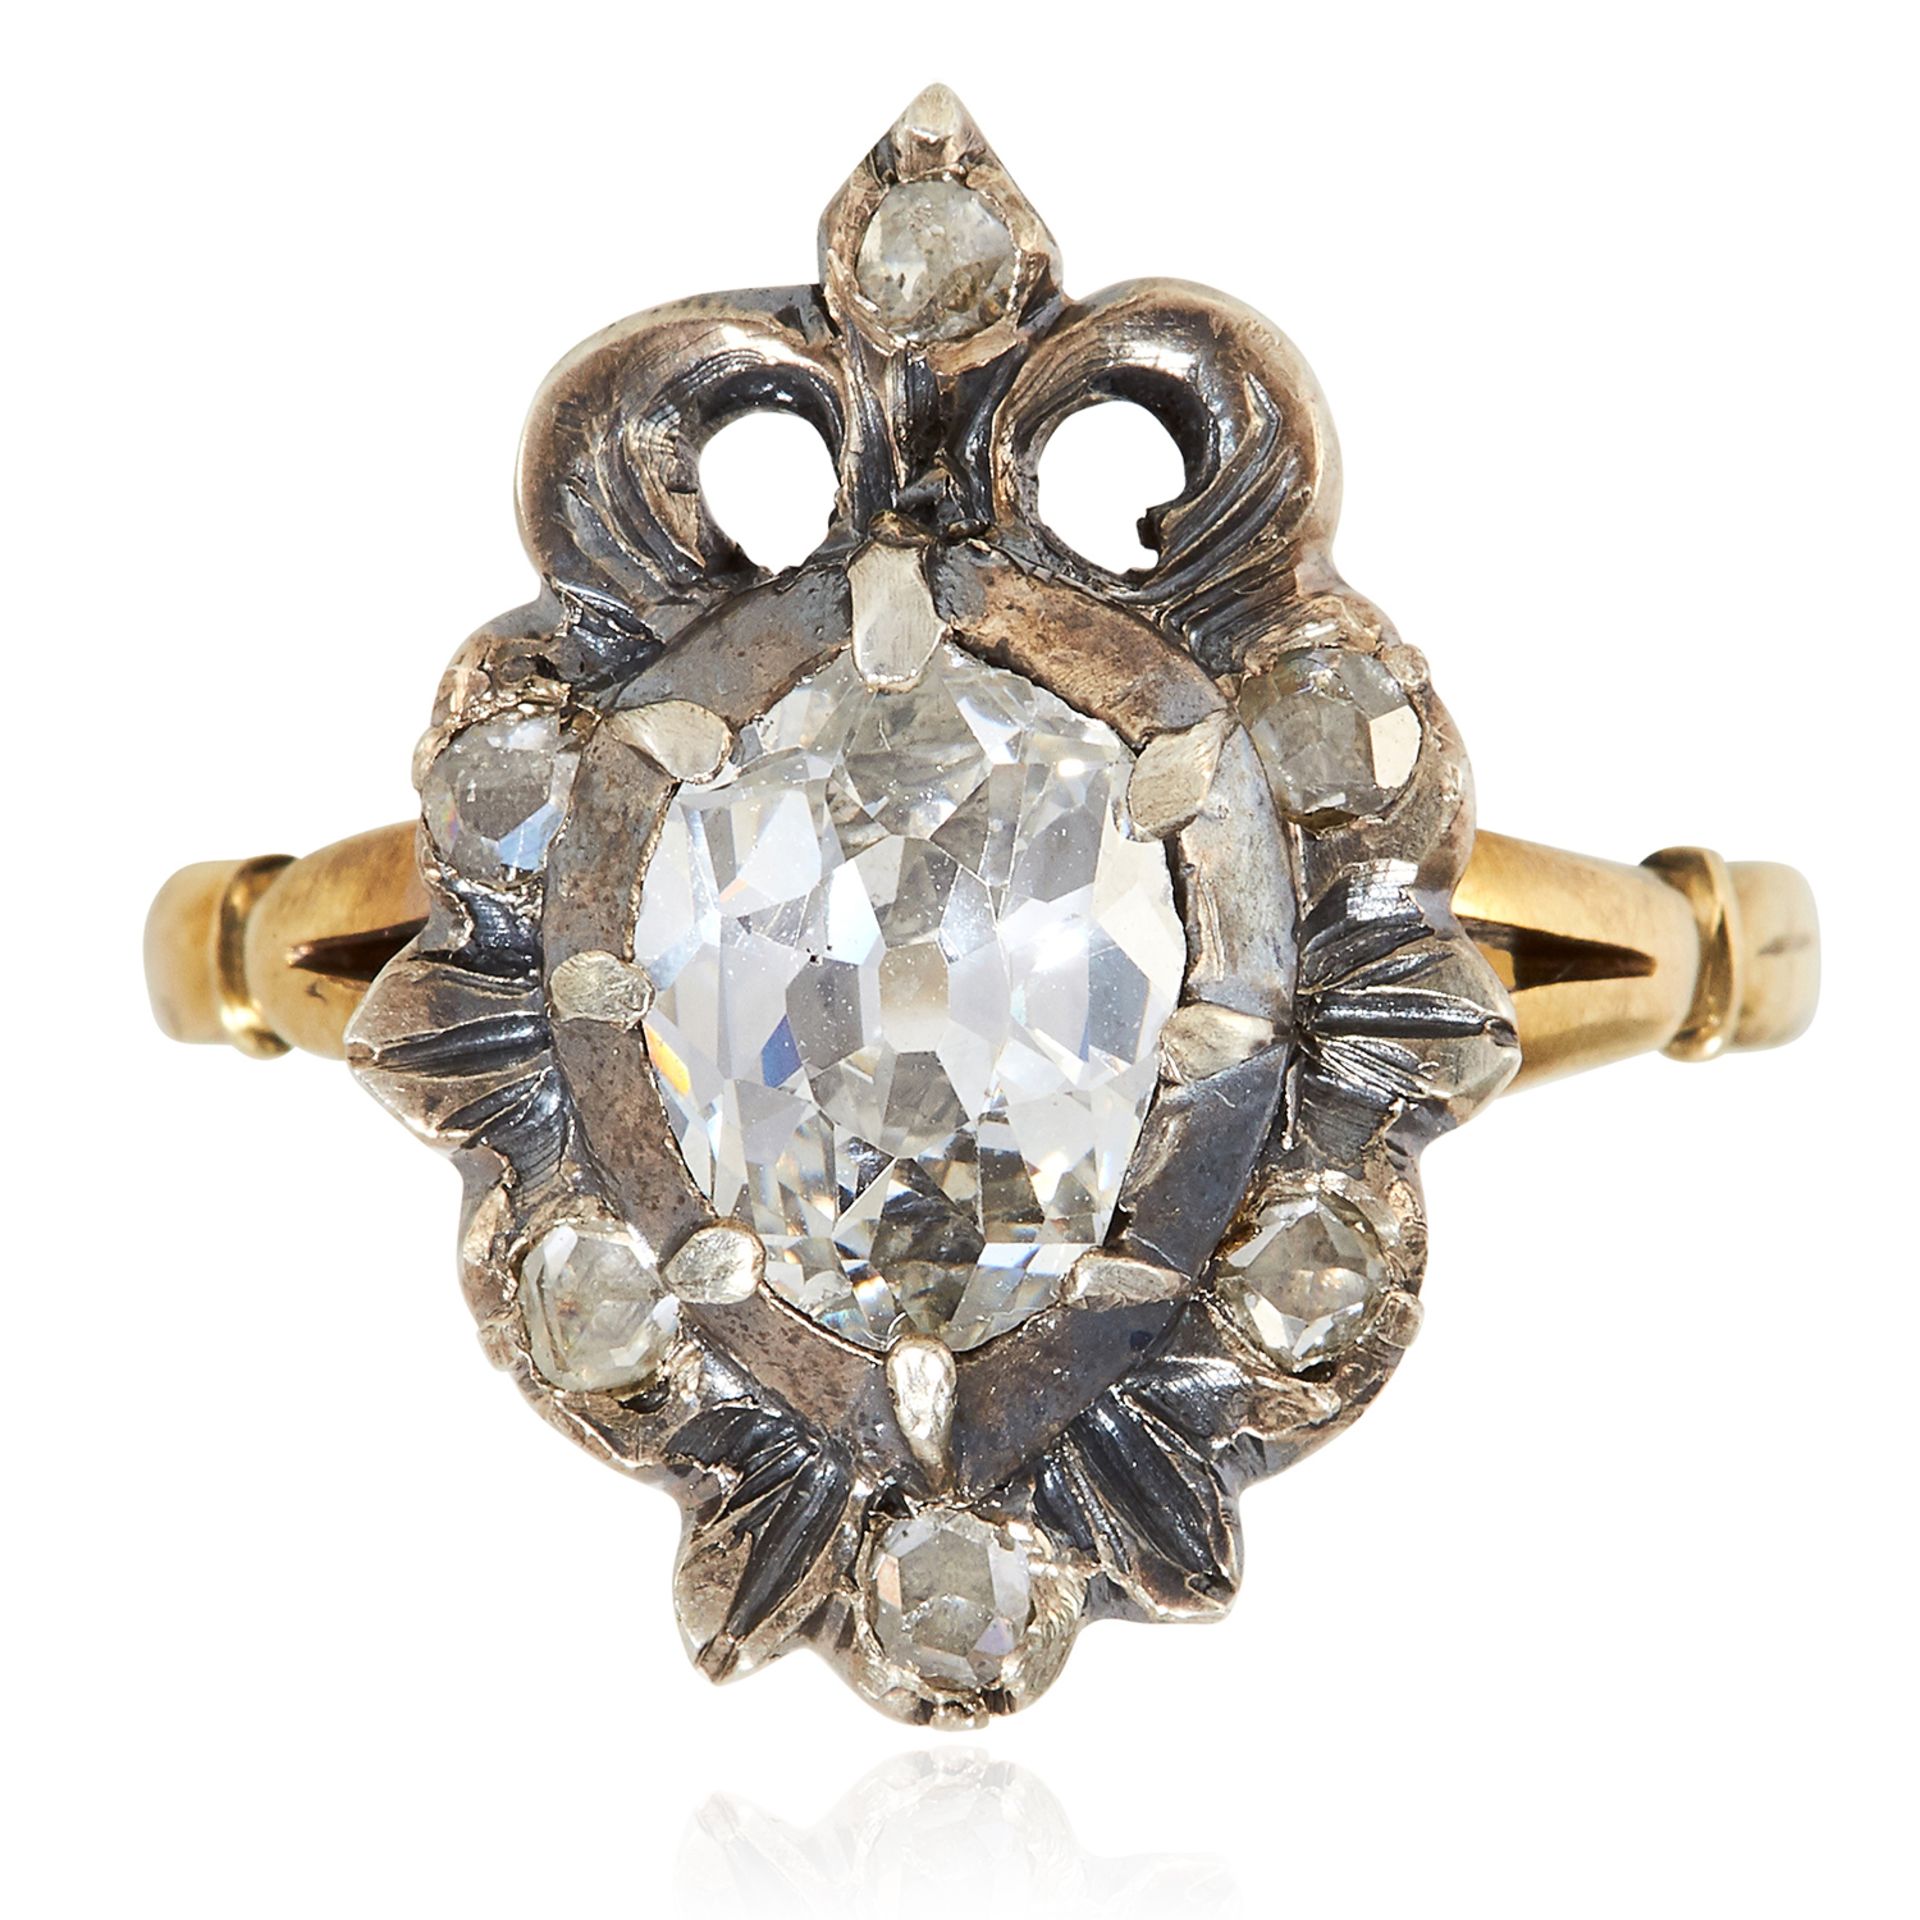 AN ANTIQUE GEORGIAN DIAMOND DRESS RING, 18TH CENTURY in high carat yellow gold, set with an old